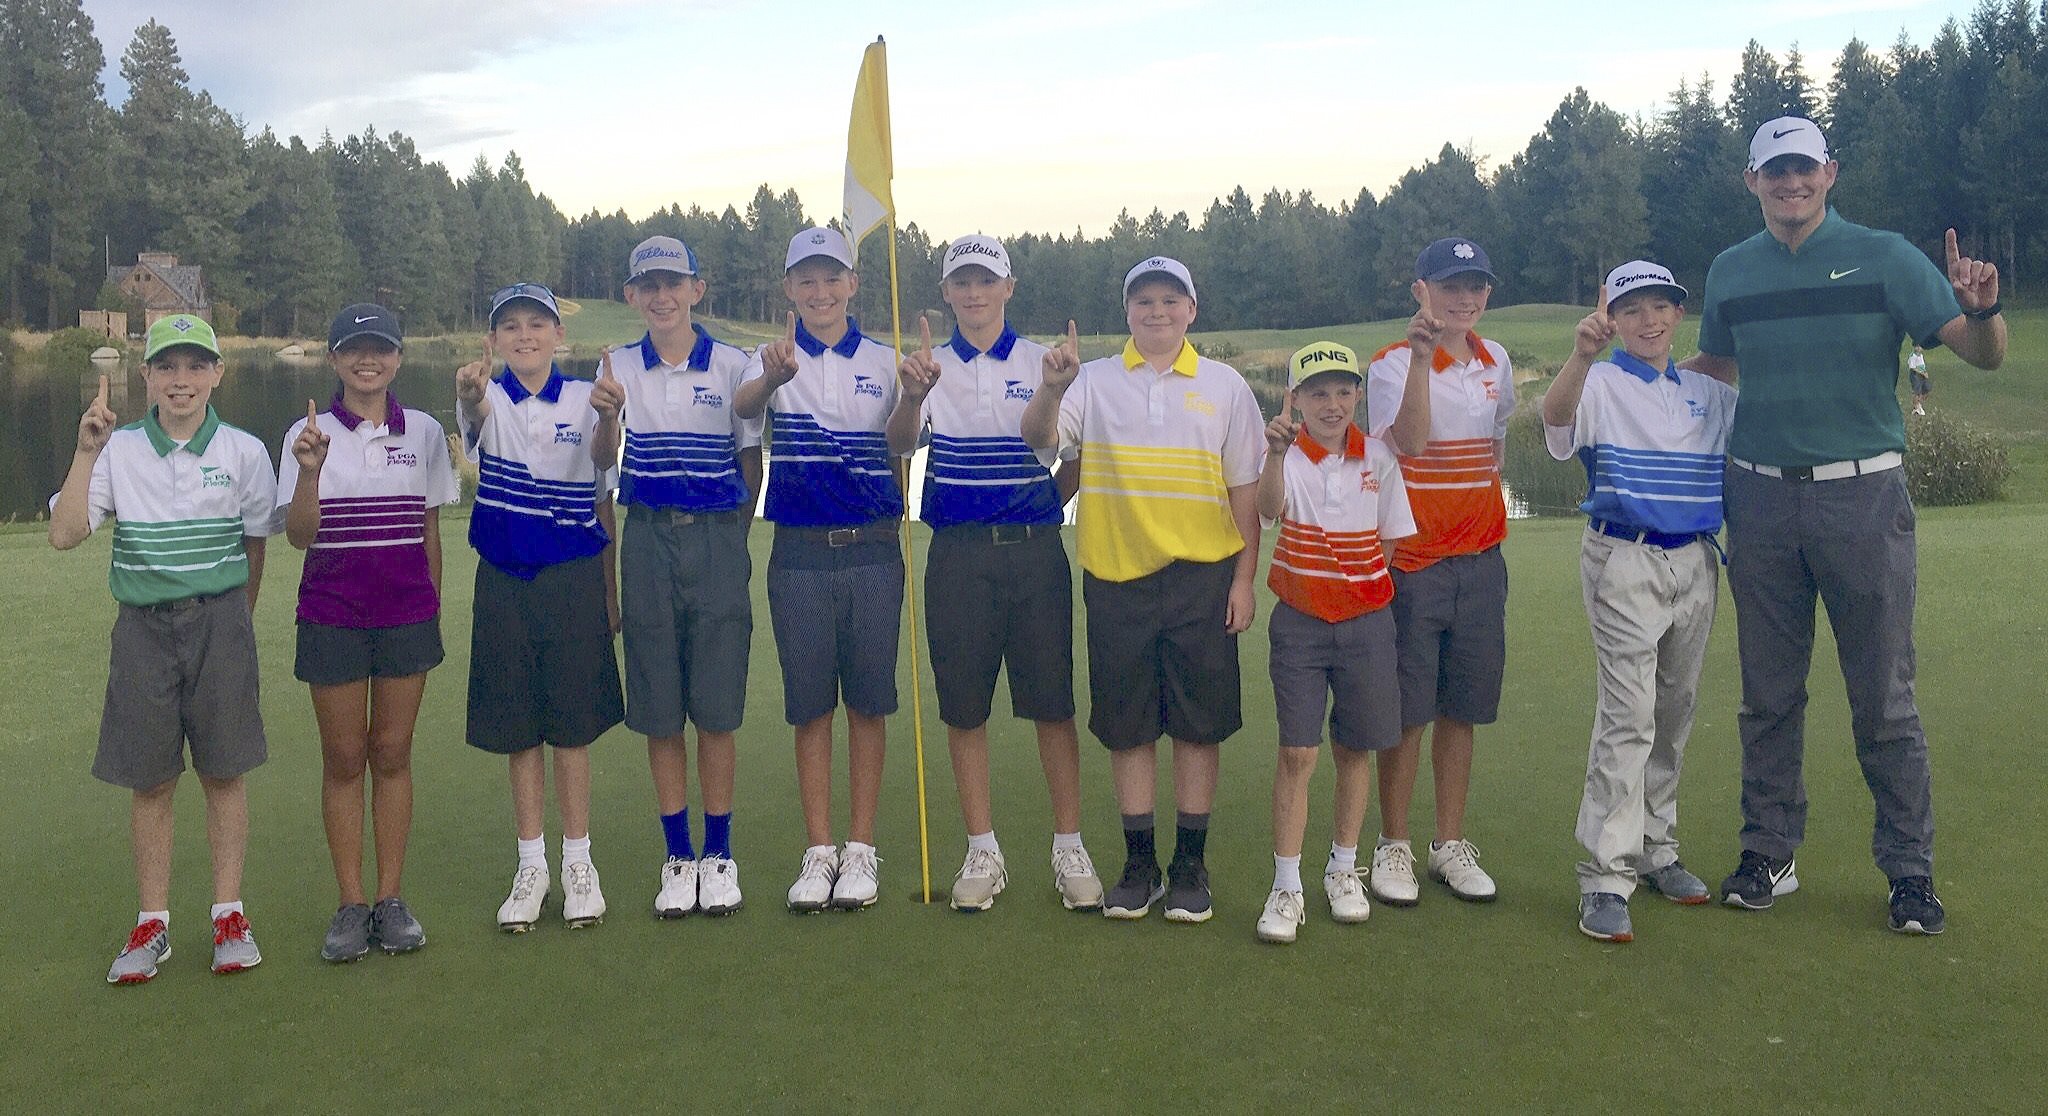 The East Hill and Sammamish All-Stars took third place in the PGA Junior League Golf Western Regional tournament.